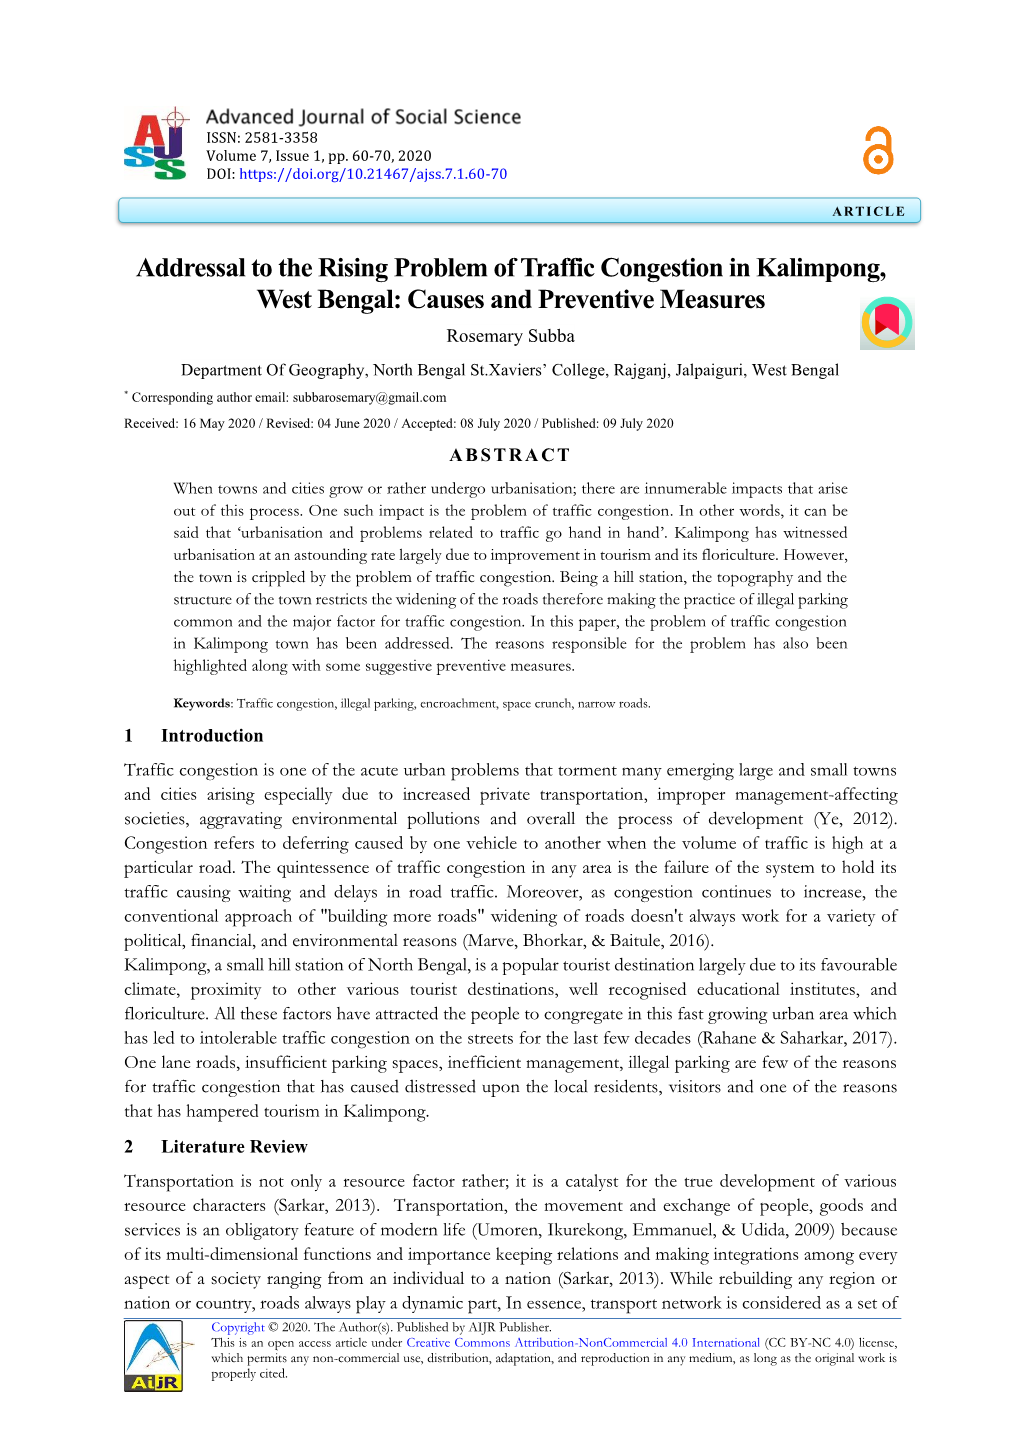 Addressal to the Rising Problem of Traffic Congestion in Kalimpong